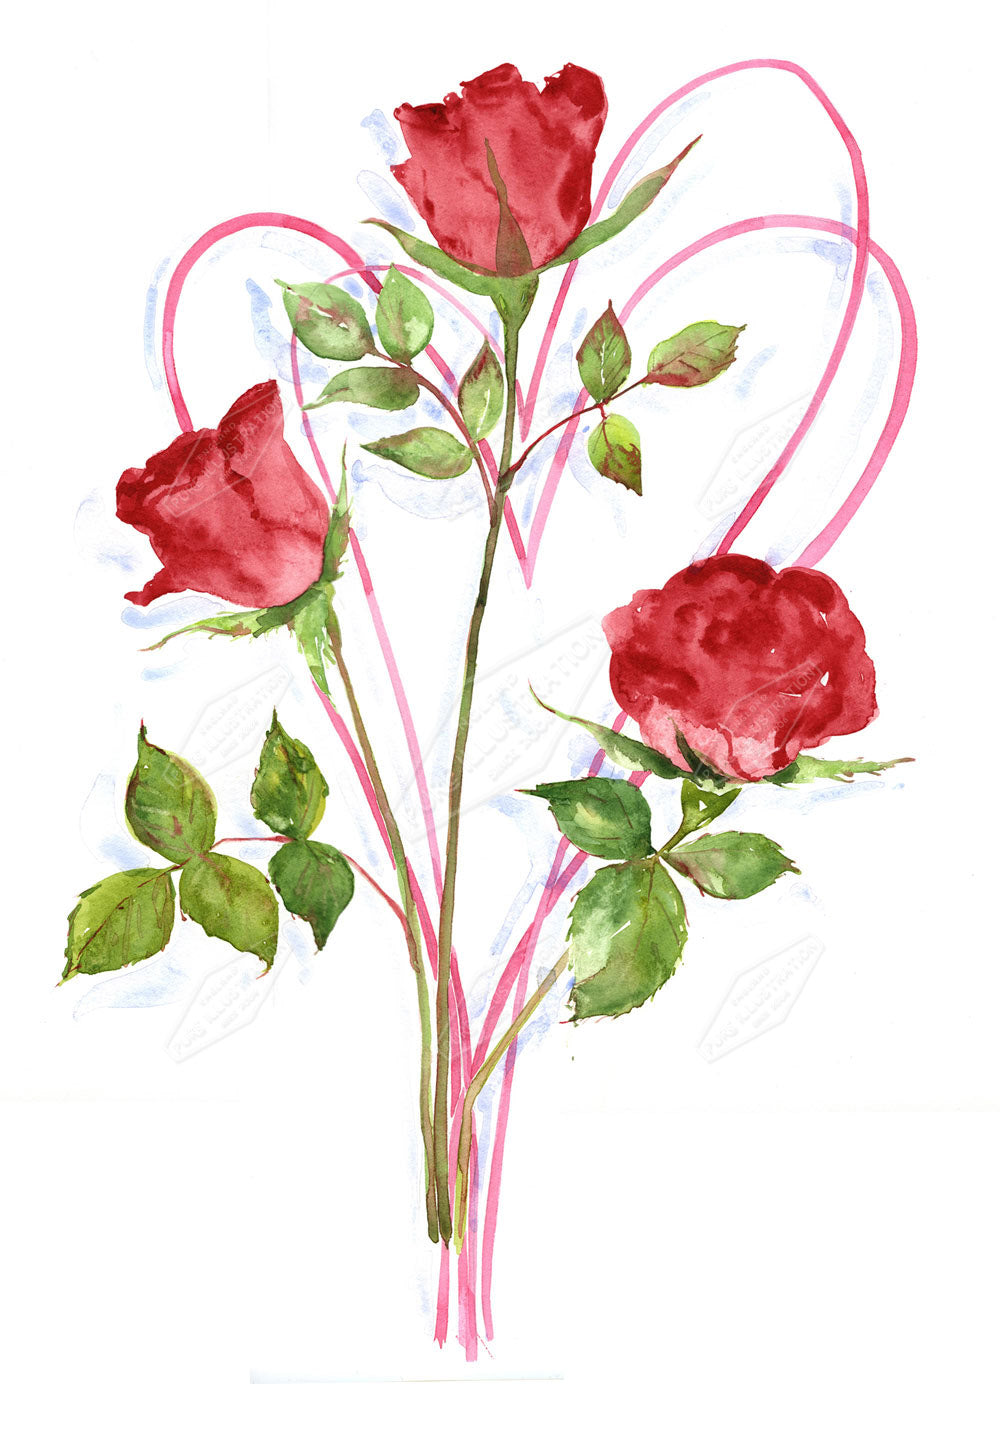 00019537AVI- Alison Vickery is represented by Pure Art Licensing Agency - Valentine's Greeting Card Design